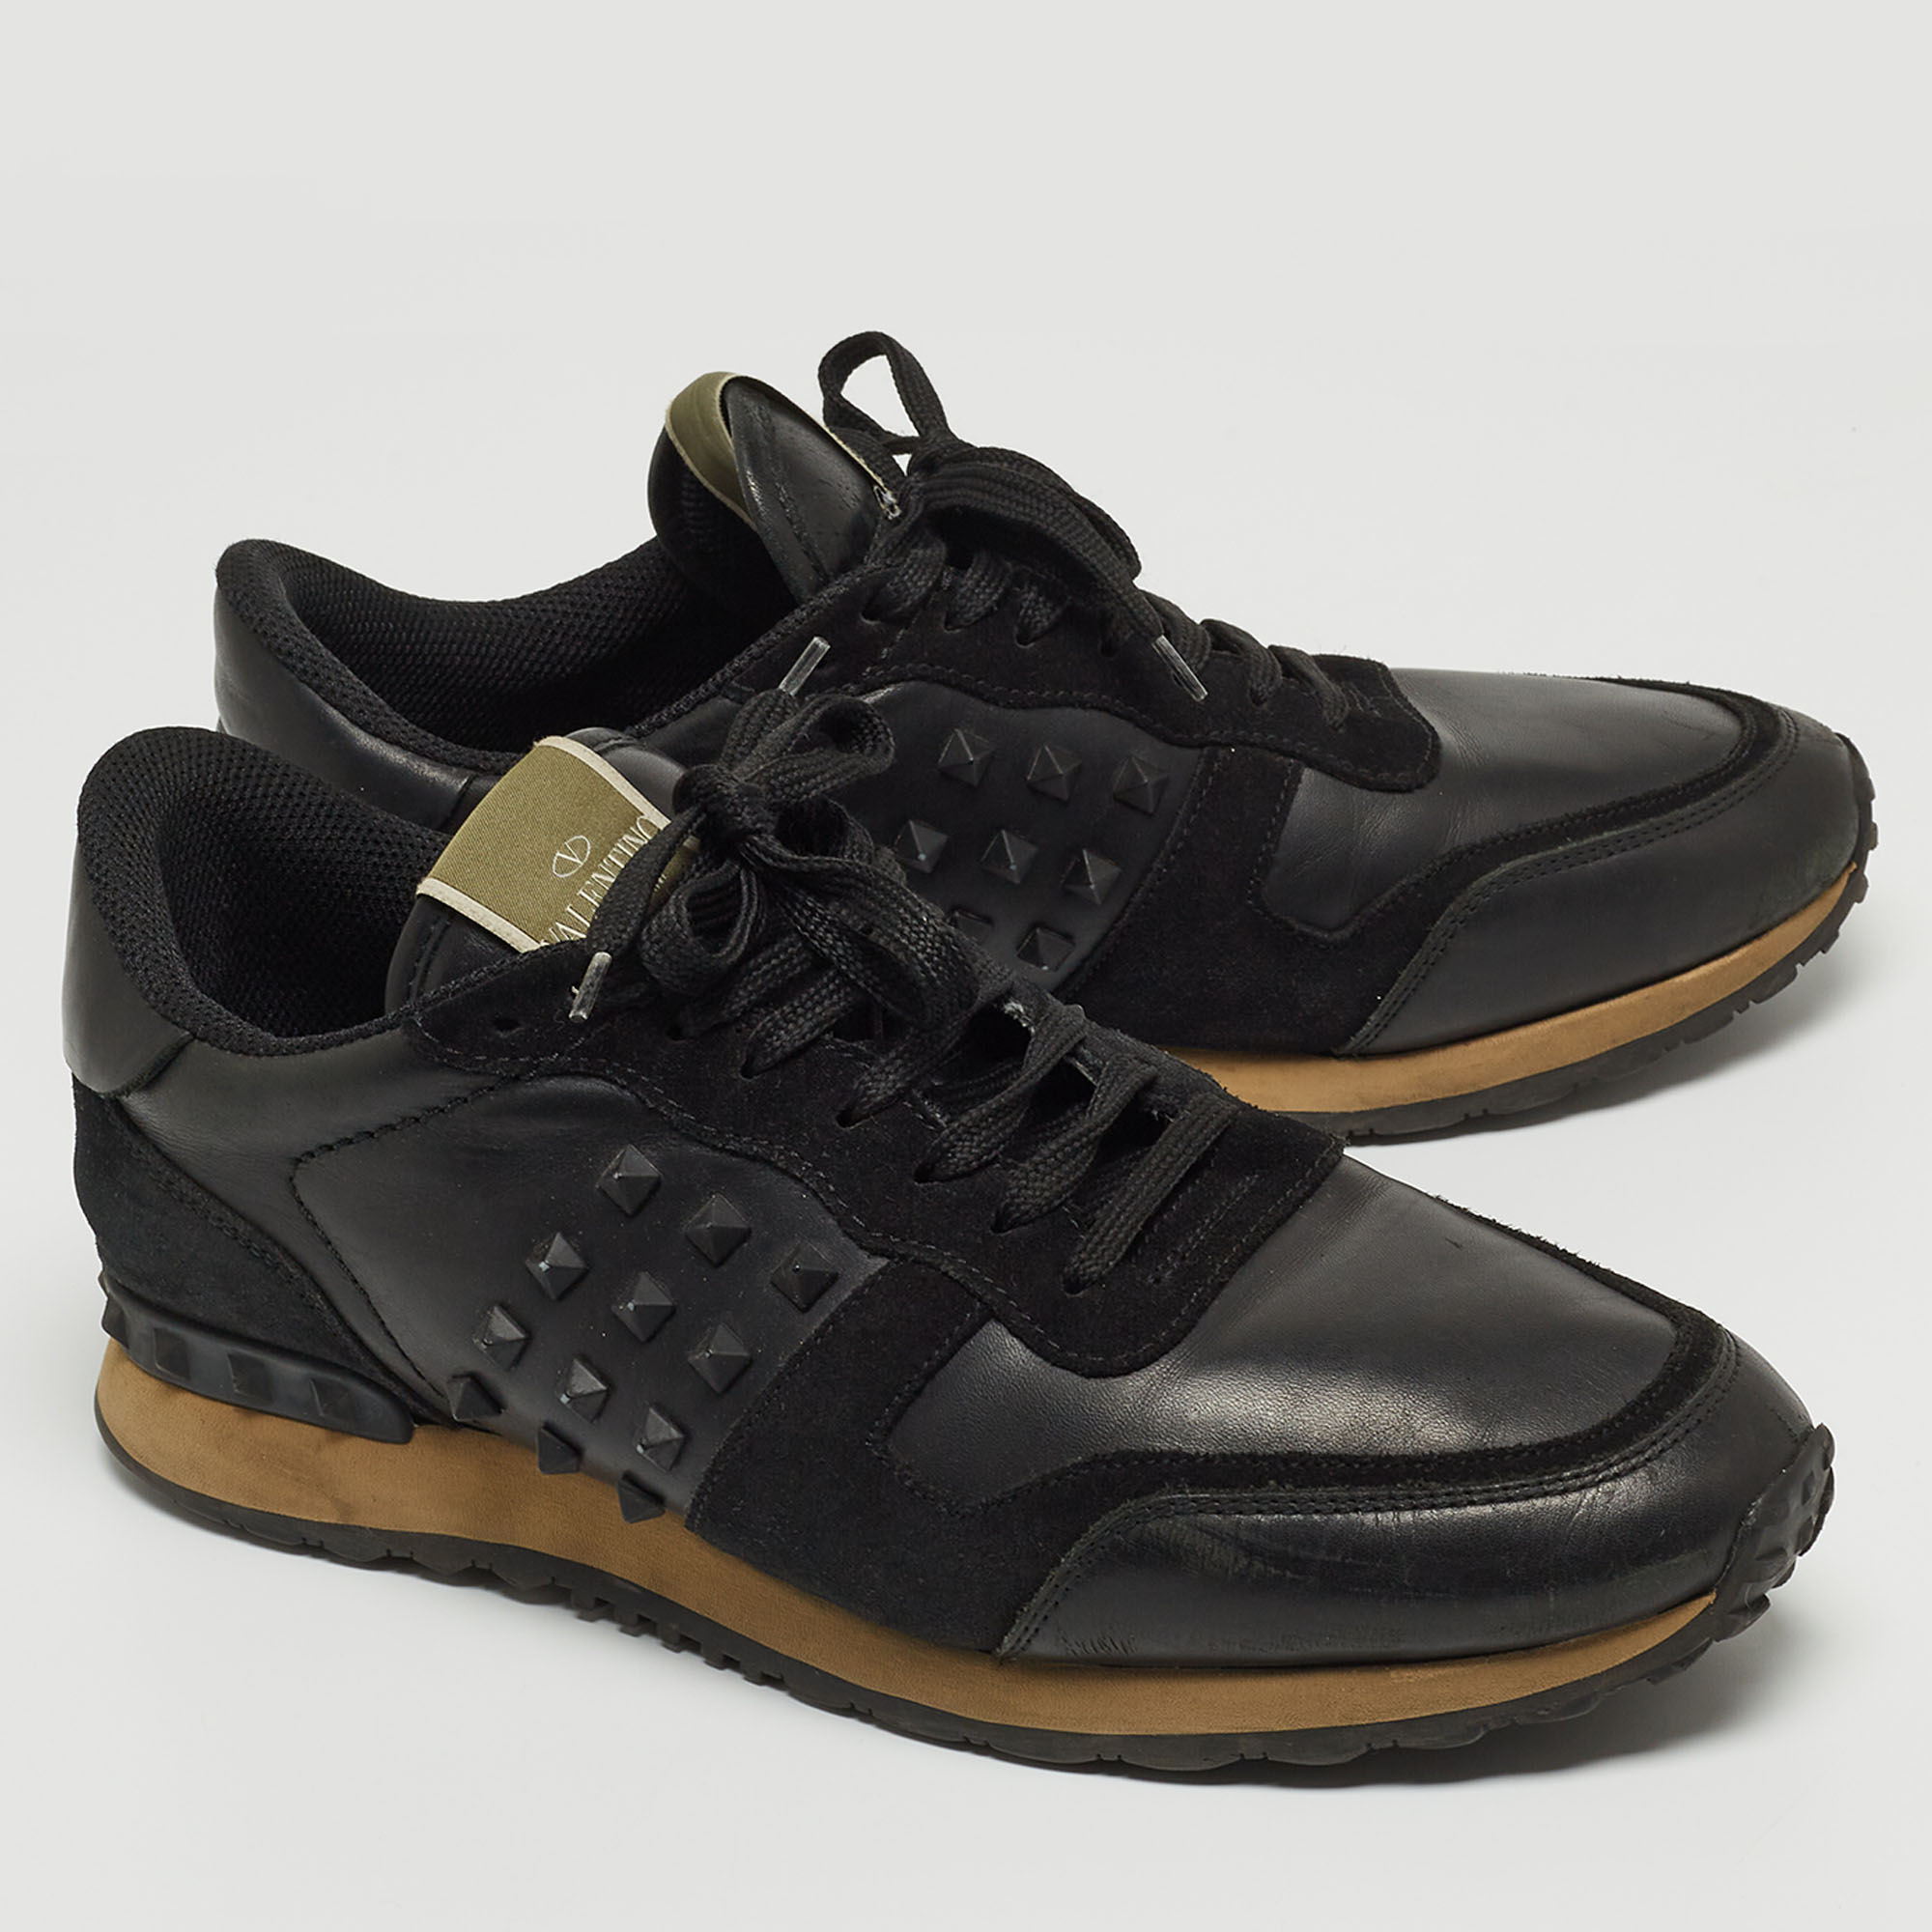 Valentino Black Leather And Suede Rockrunner Sneakers Size 43